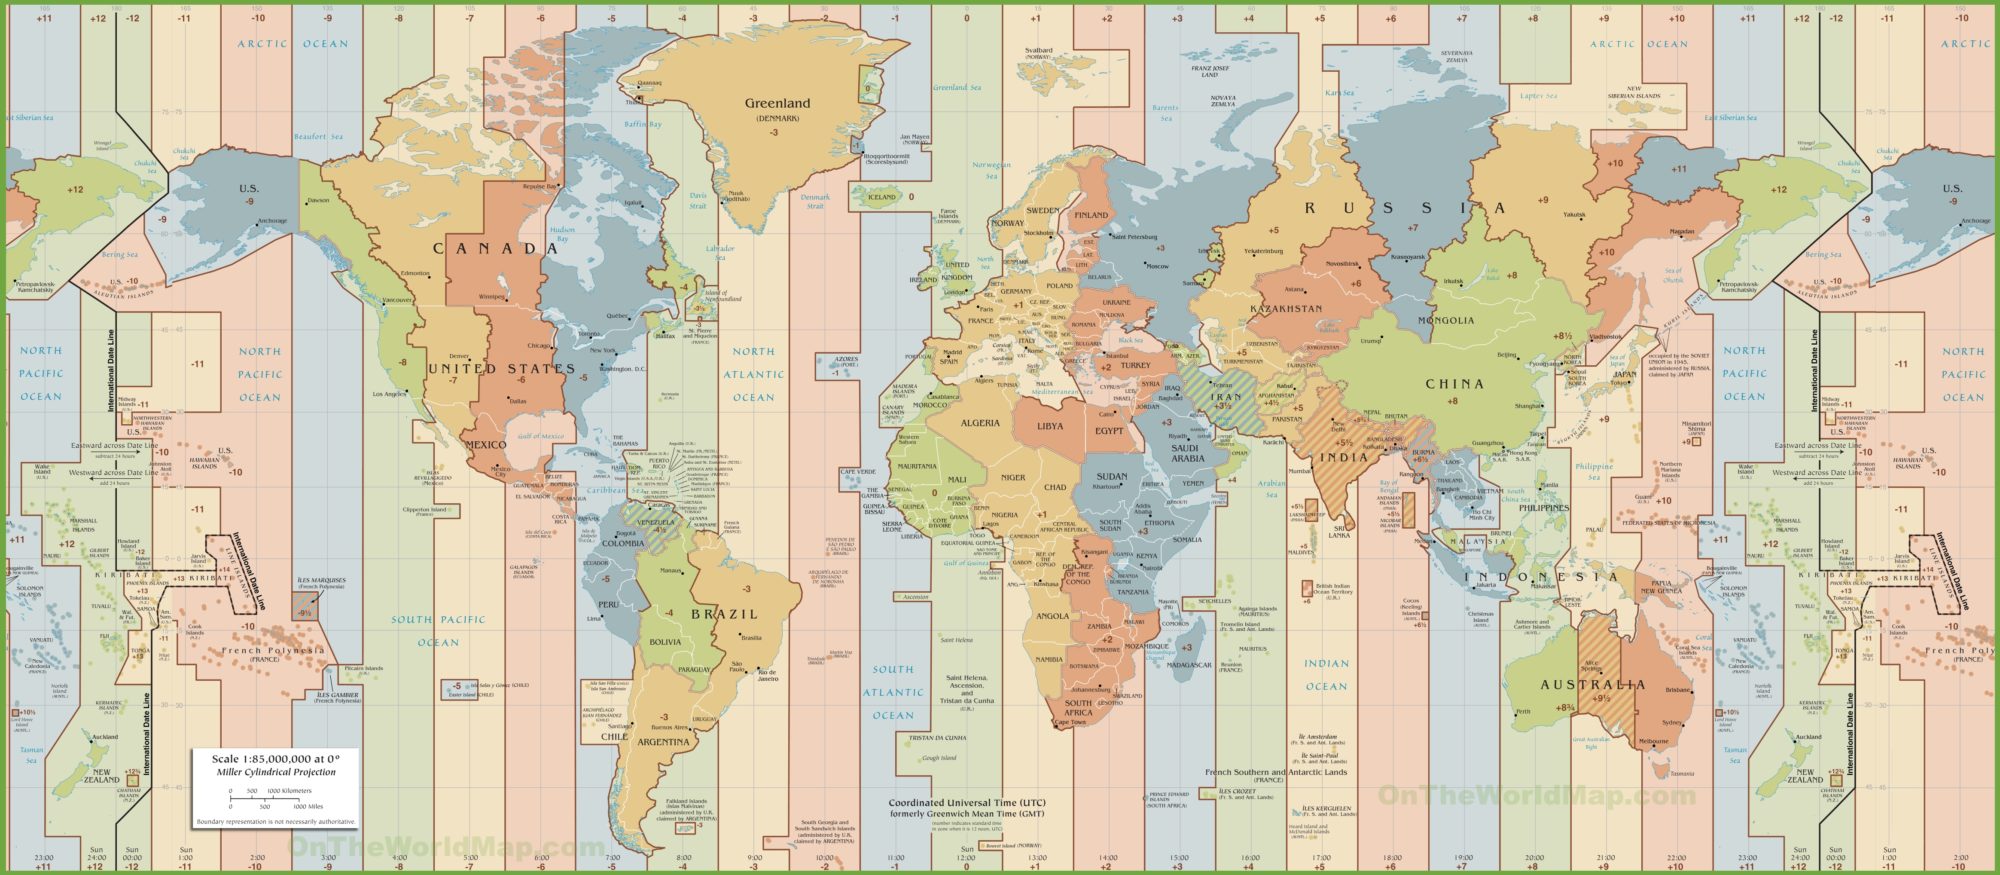 World Current Time Zones by country Map